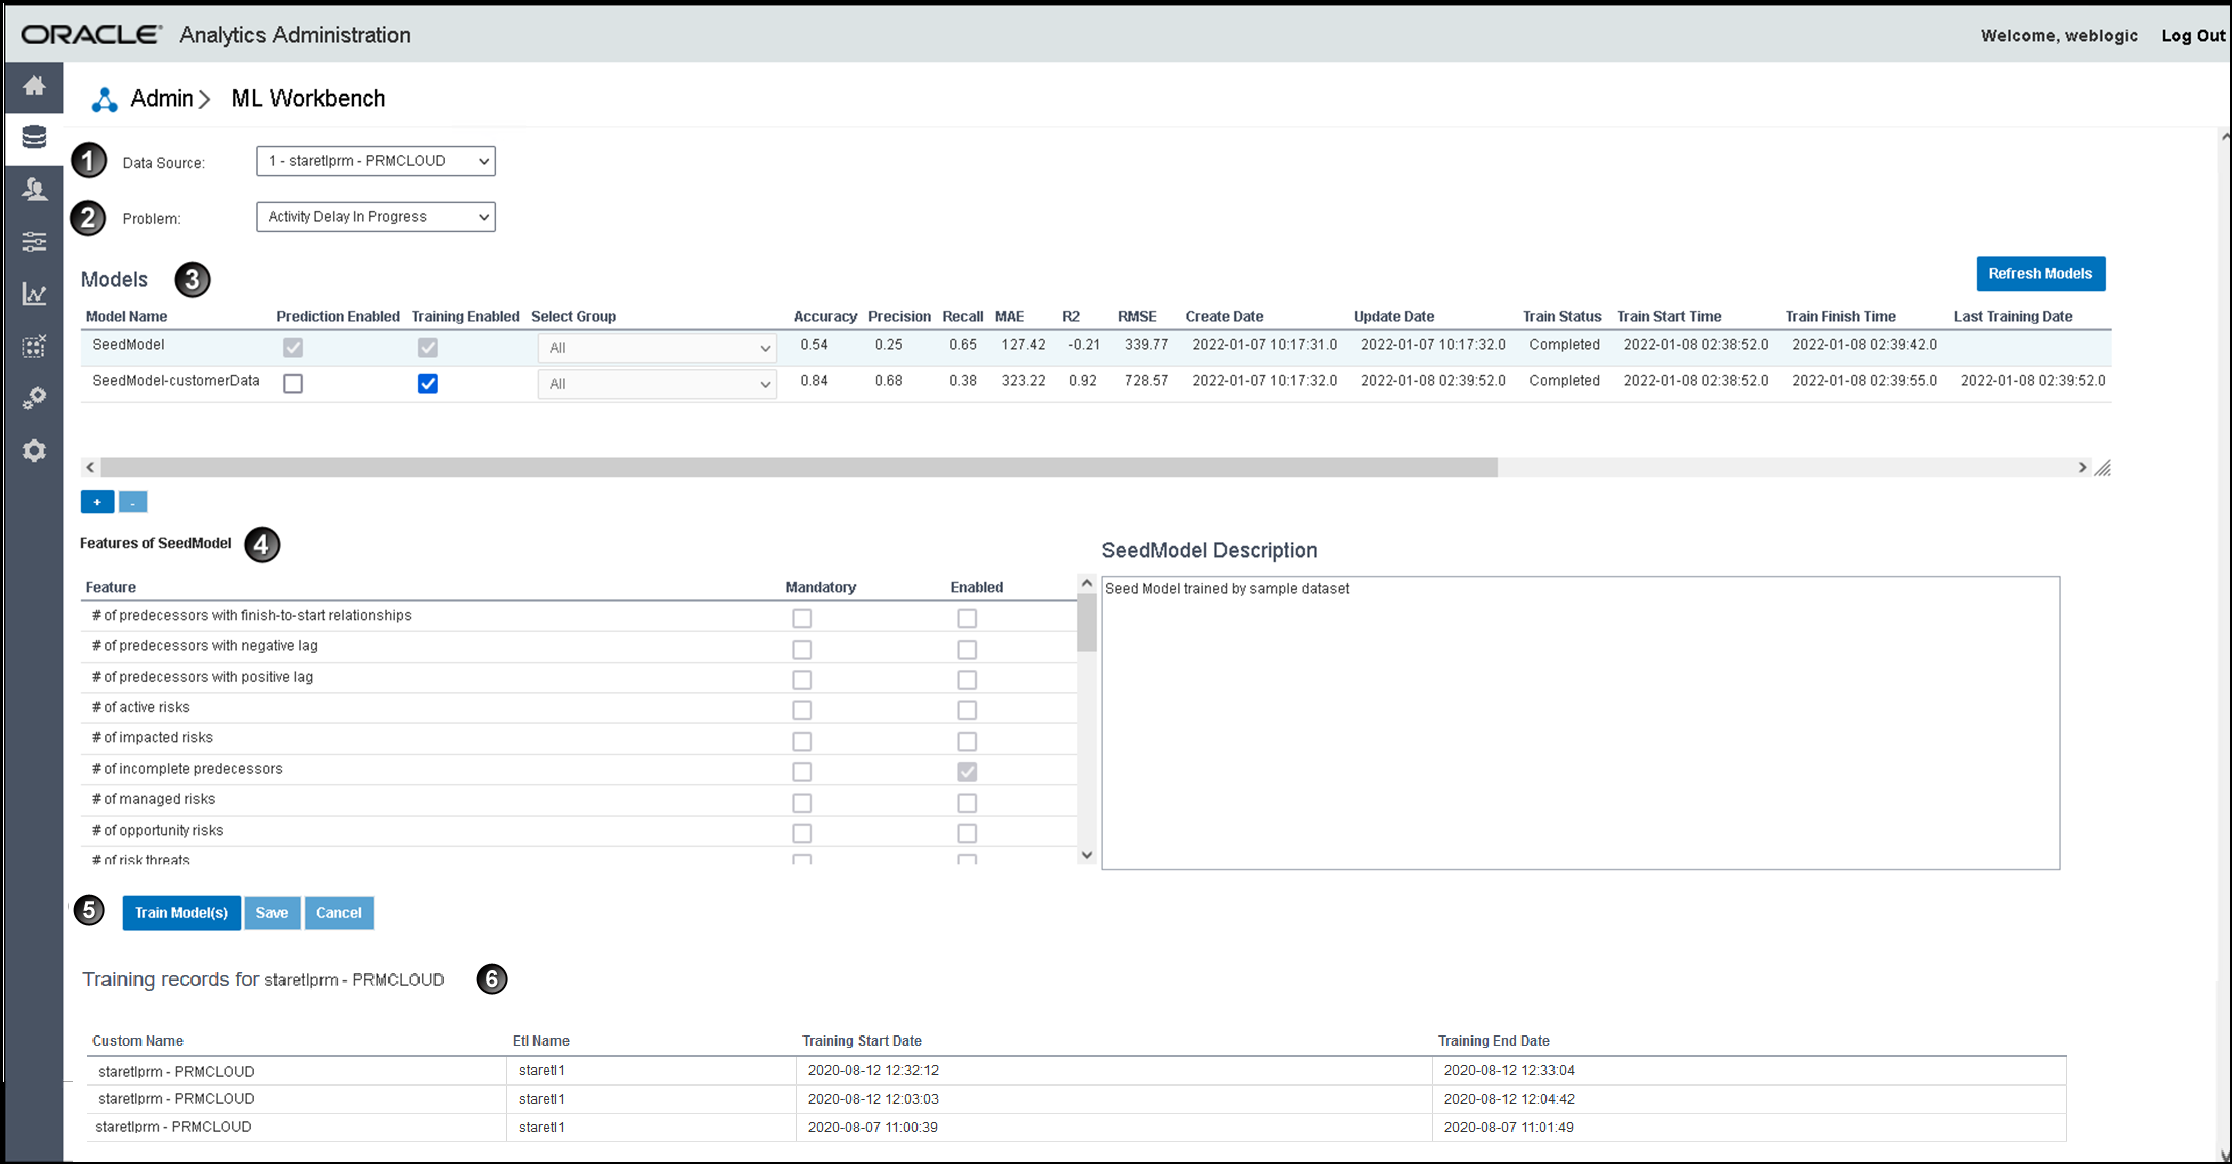 ML Workbench of CIC for Oracle Primavera Cloud